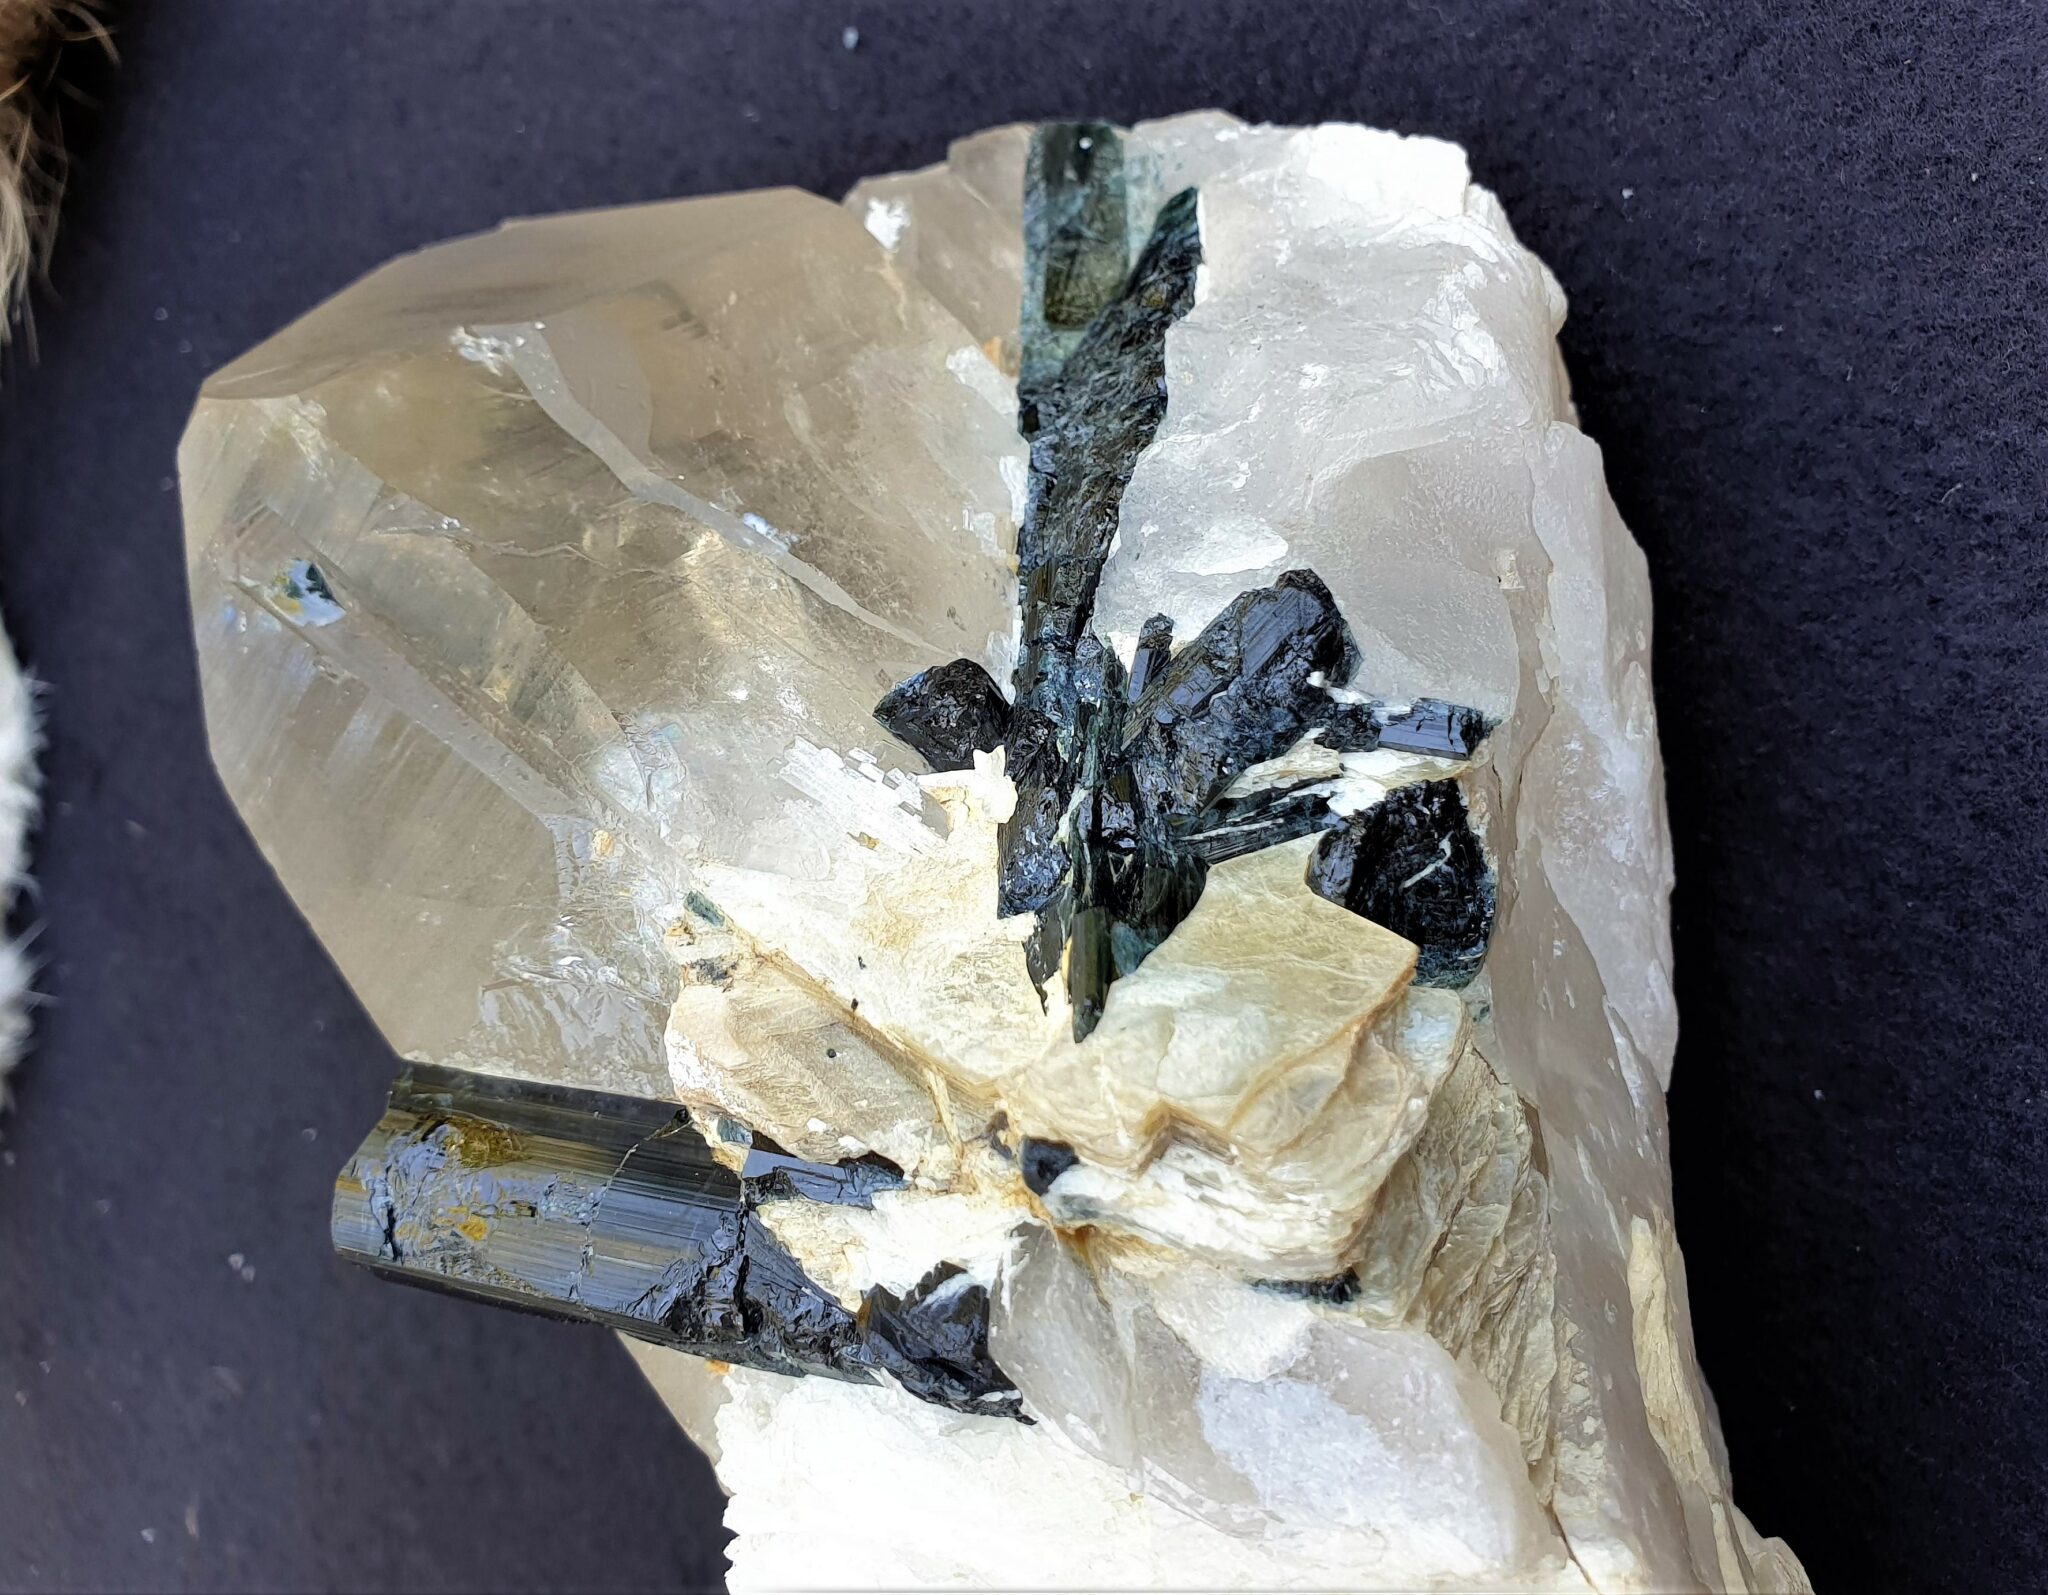 Clear Quartz with Green and Black Tourmaline Specimen • The Crystal Cave